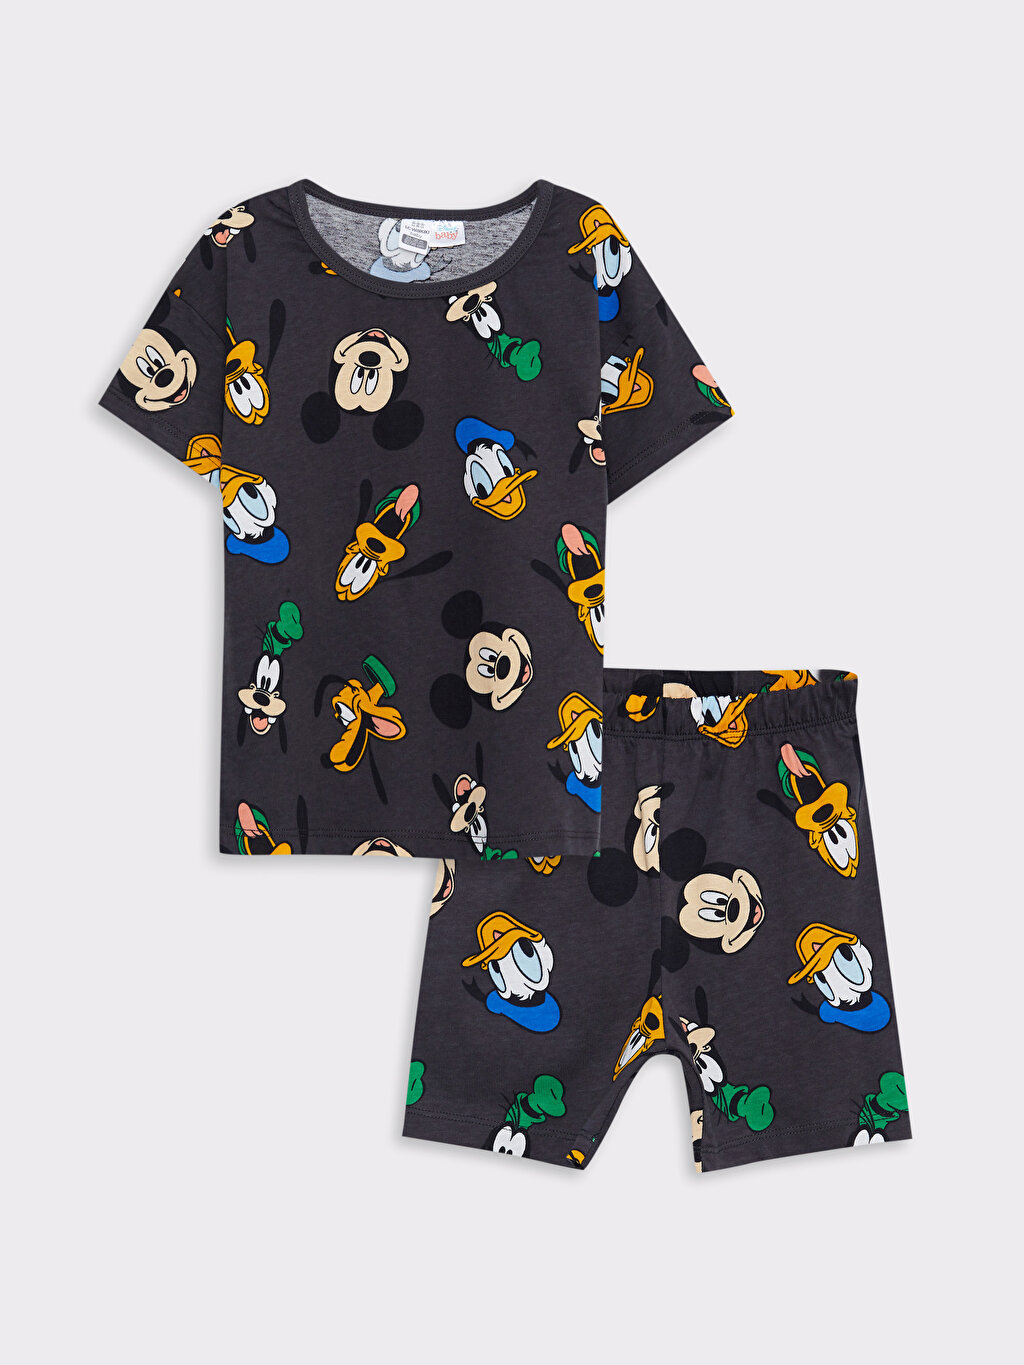 Crew Neck Short Sleeve Mickey Mouse Printed Cotton Baby Boy Pajamas Set  -S2BL80Z1-LQ9 - S2BL80Z1-LQ9 - LC Waikiki